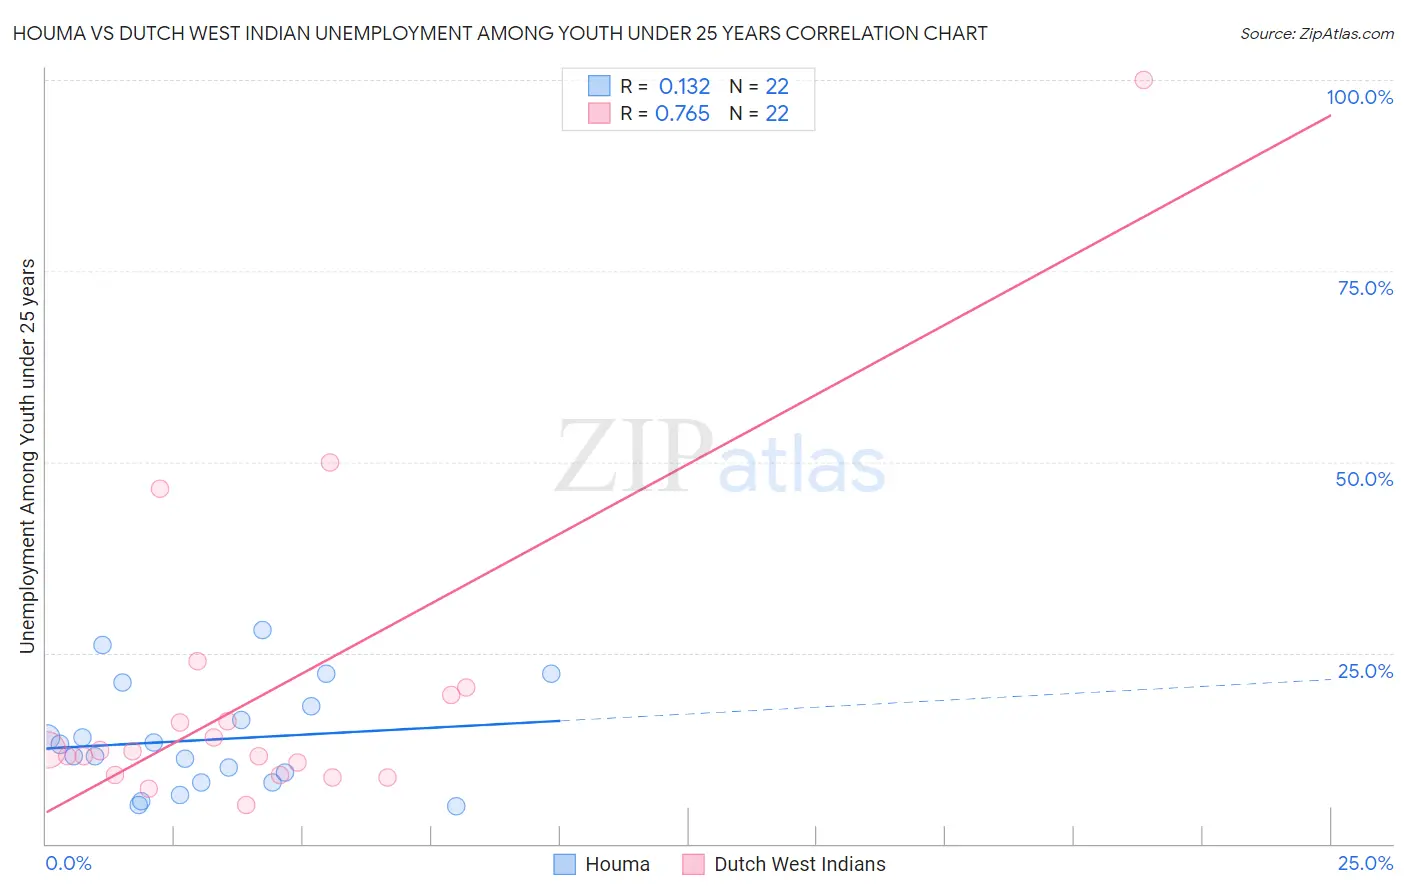 Houma vs Dutch West Indian Unemployment Among Youth under 25 years